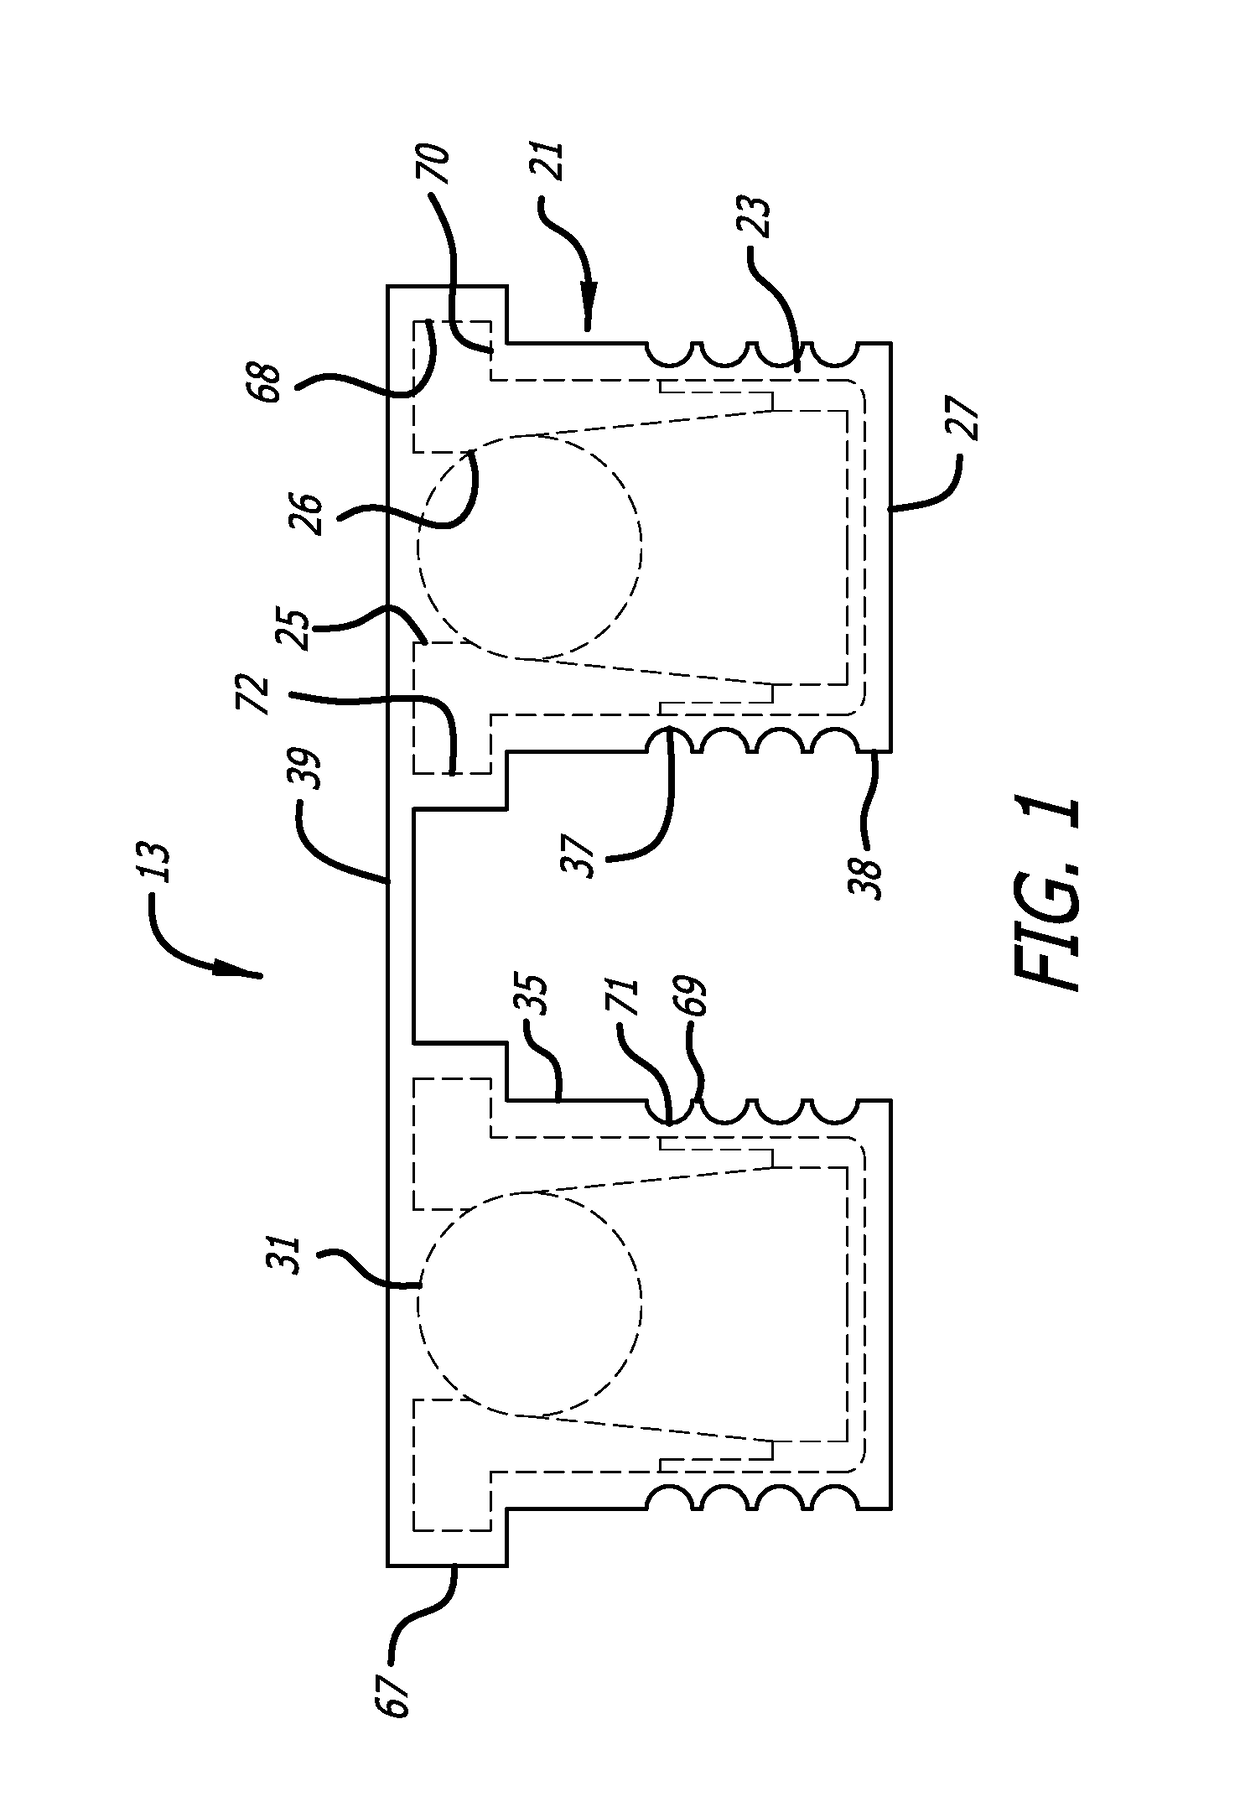 Sleep apnea device with valve poppet to positively block exhaling and method of manufacture